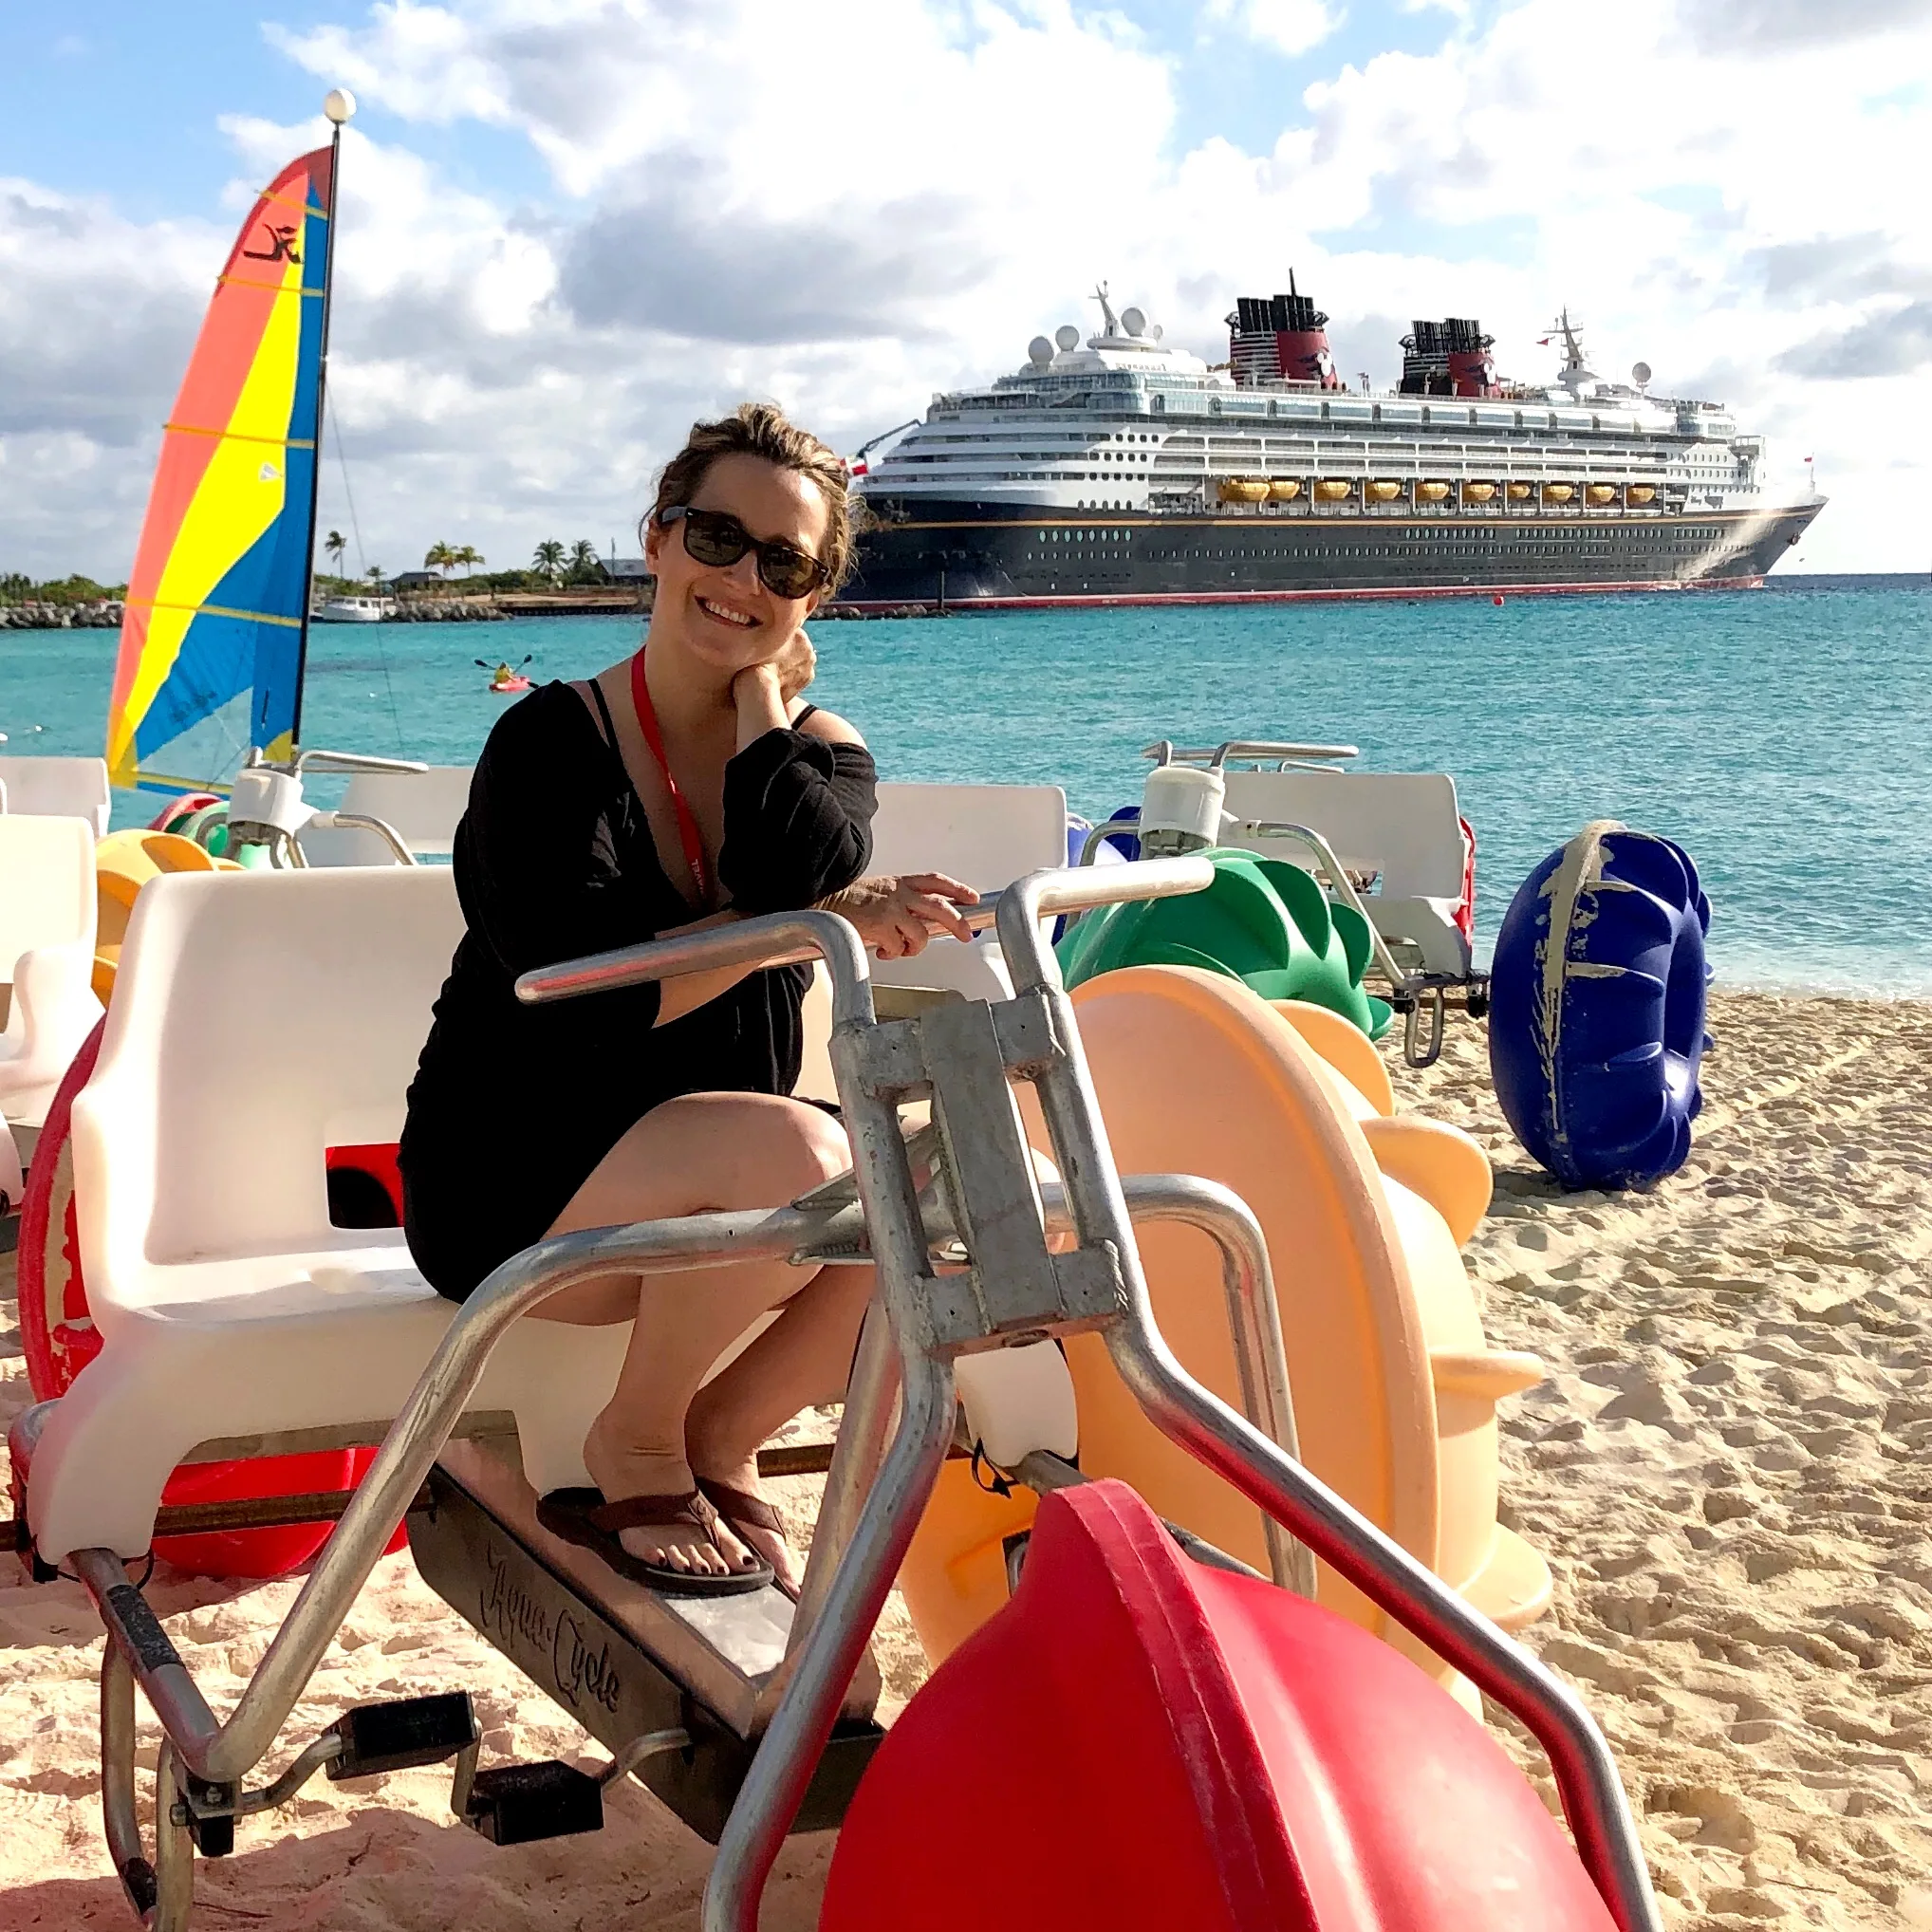 So I went on a Disney cruise recently – PREP201